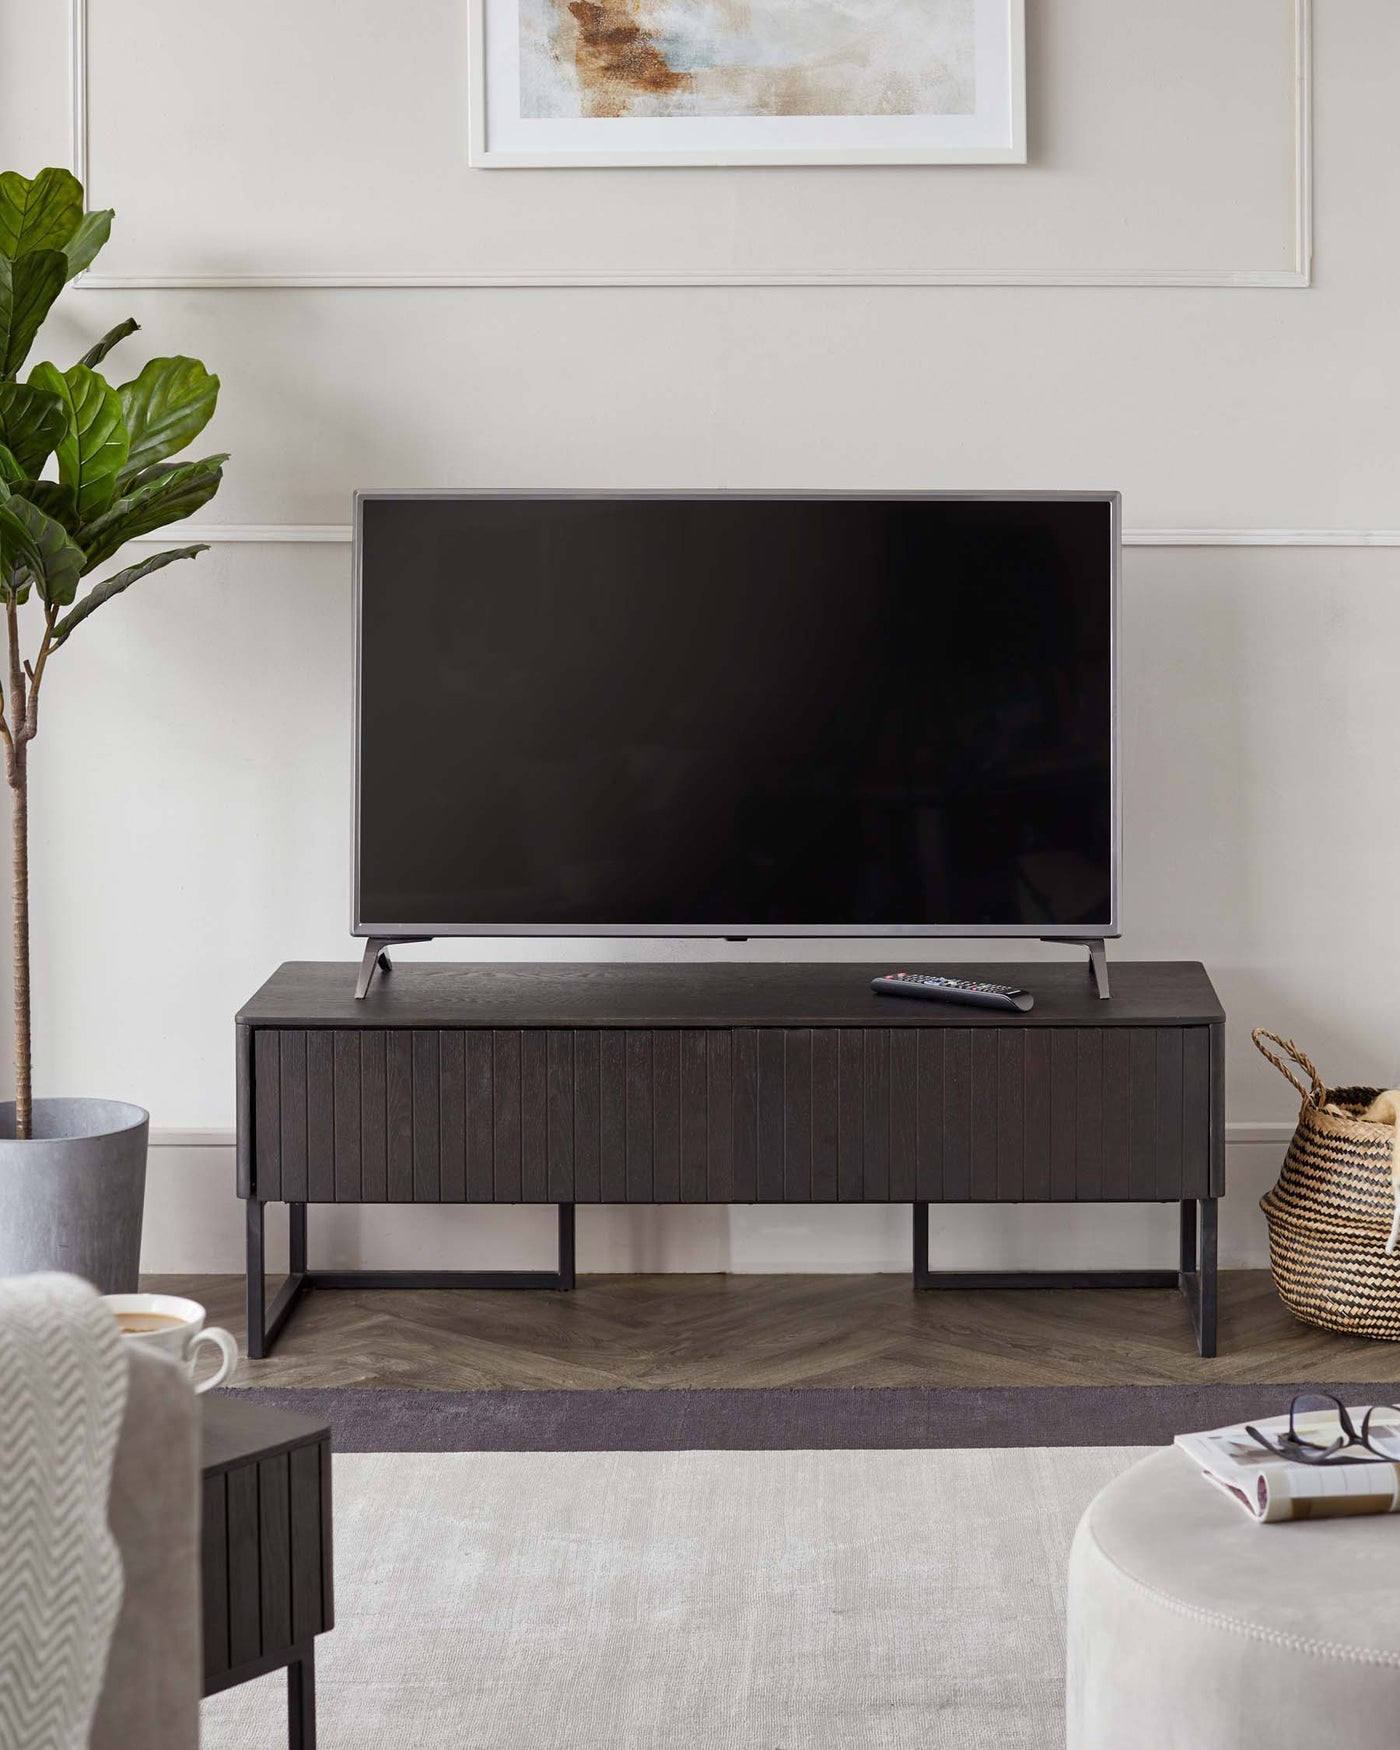 Modern dark wood media console with sleek metal legs, featuring a minimalist design and clean lines, ideal for supporting a television and accompanying electronics.